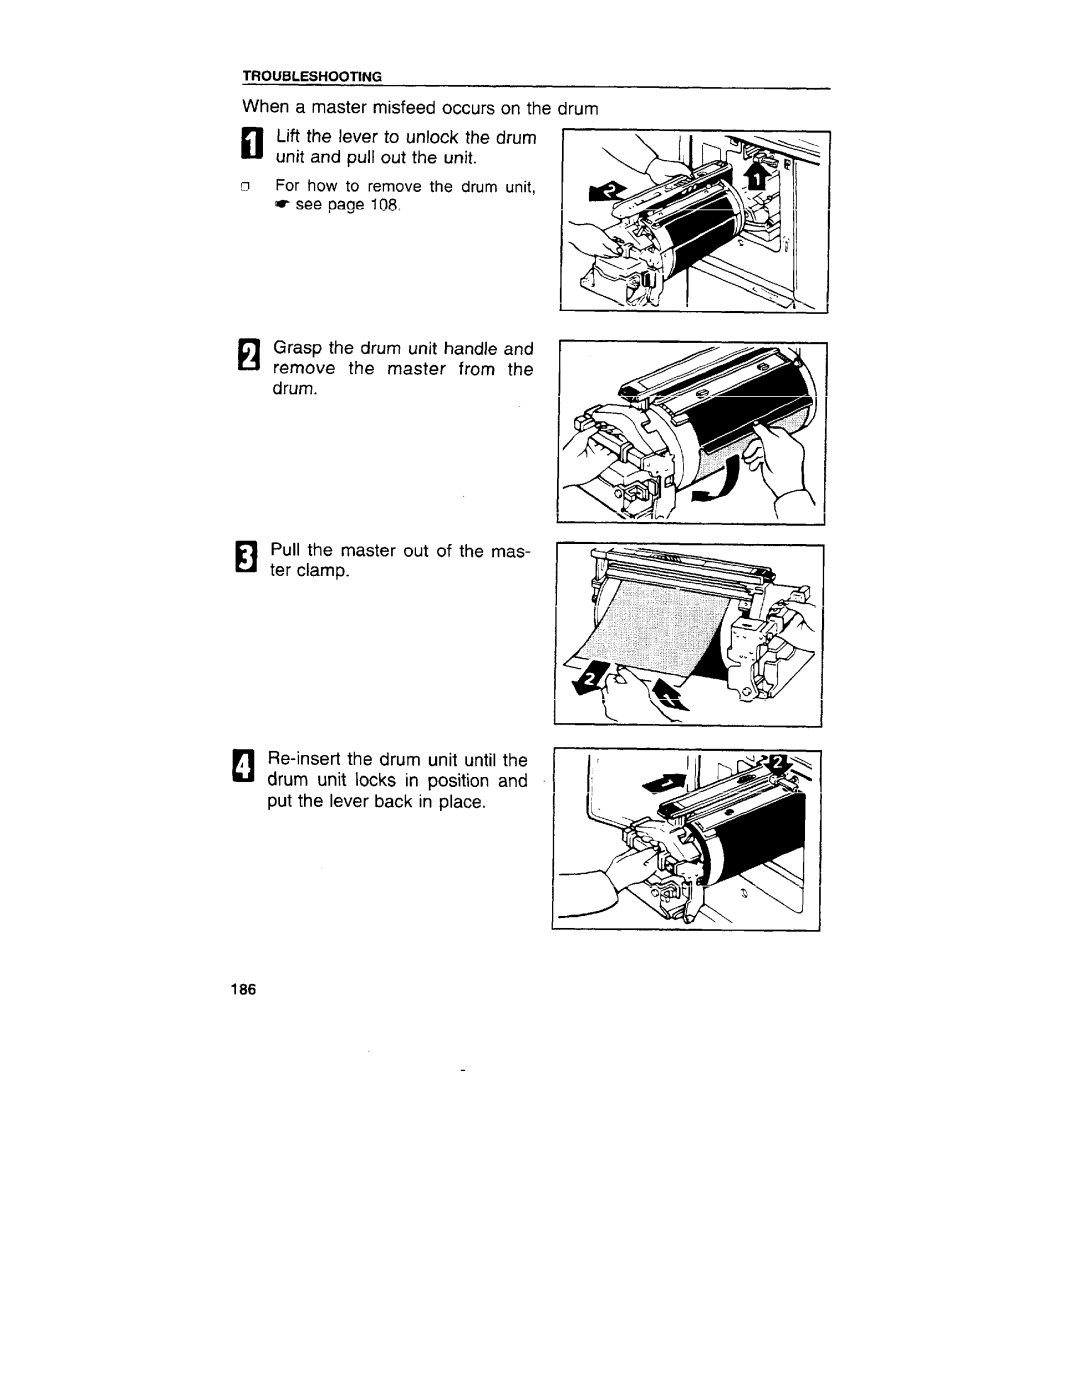 Ricoh VT3800 manual For how to remove the drum unit, see 